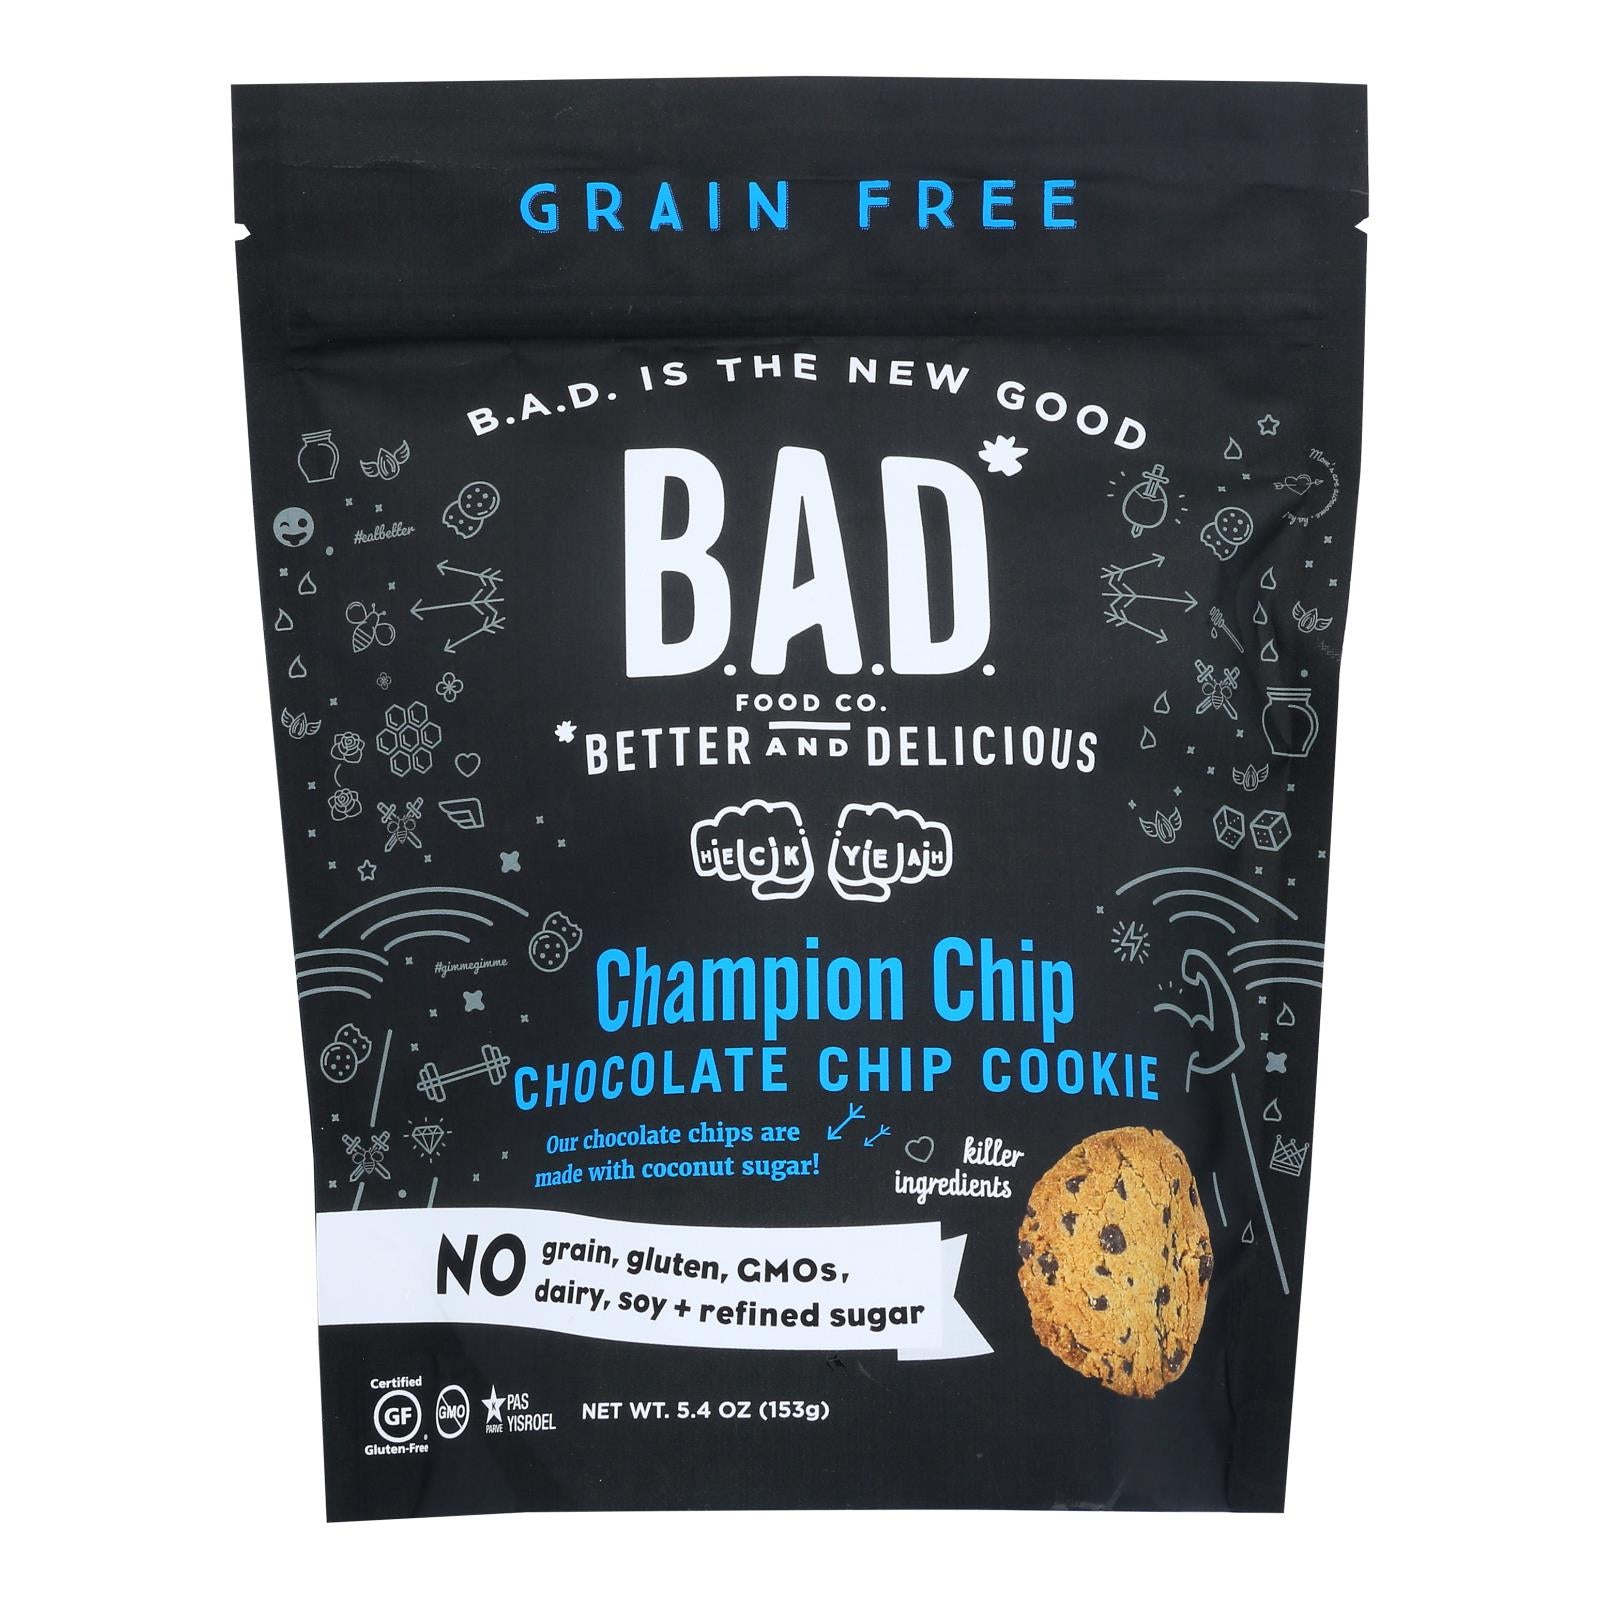 B.A.D. FOOD CO., B.a.d. Food Co. - Cookies Chocolate Chip - Case of 6-5.4 OZ (Pack of 6)